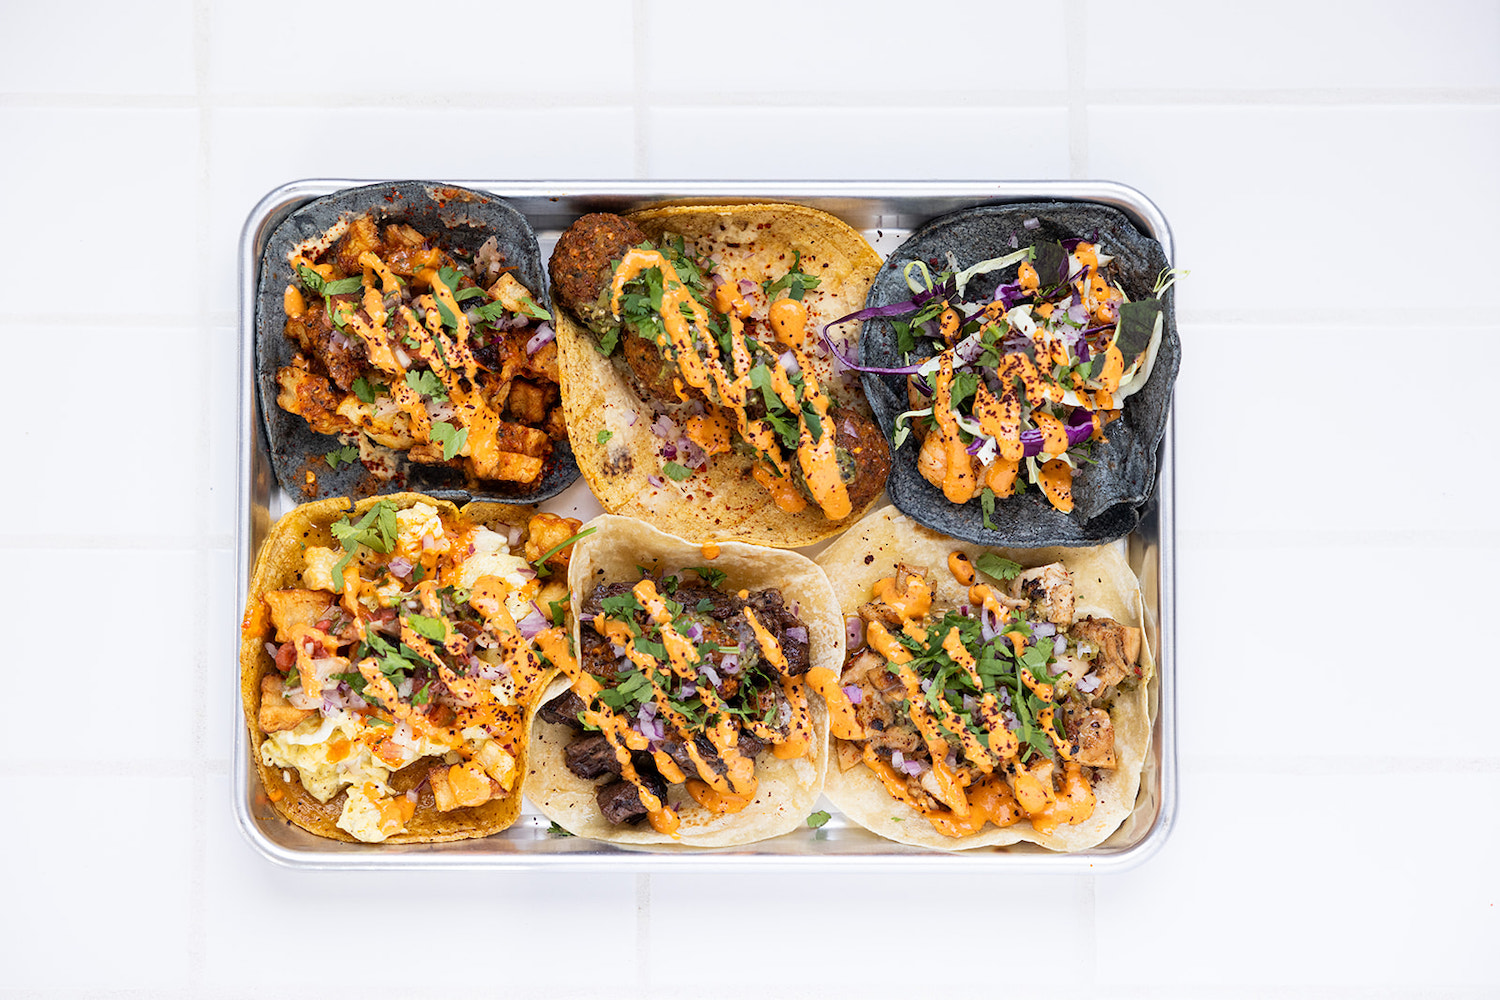 Spread of tacos on a tray